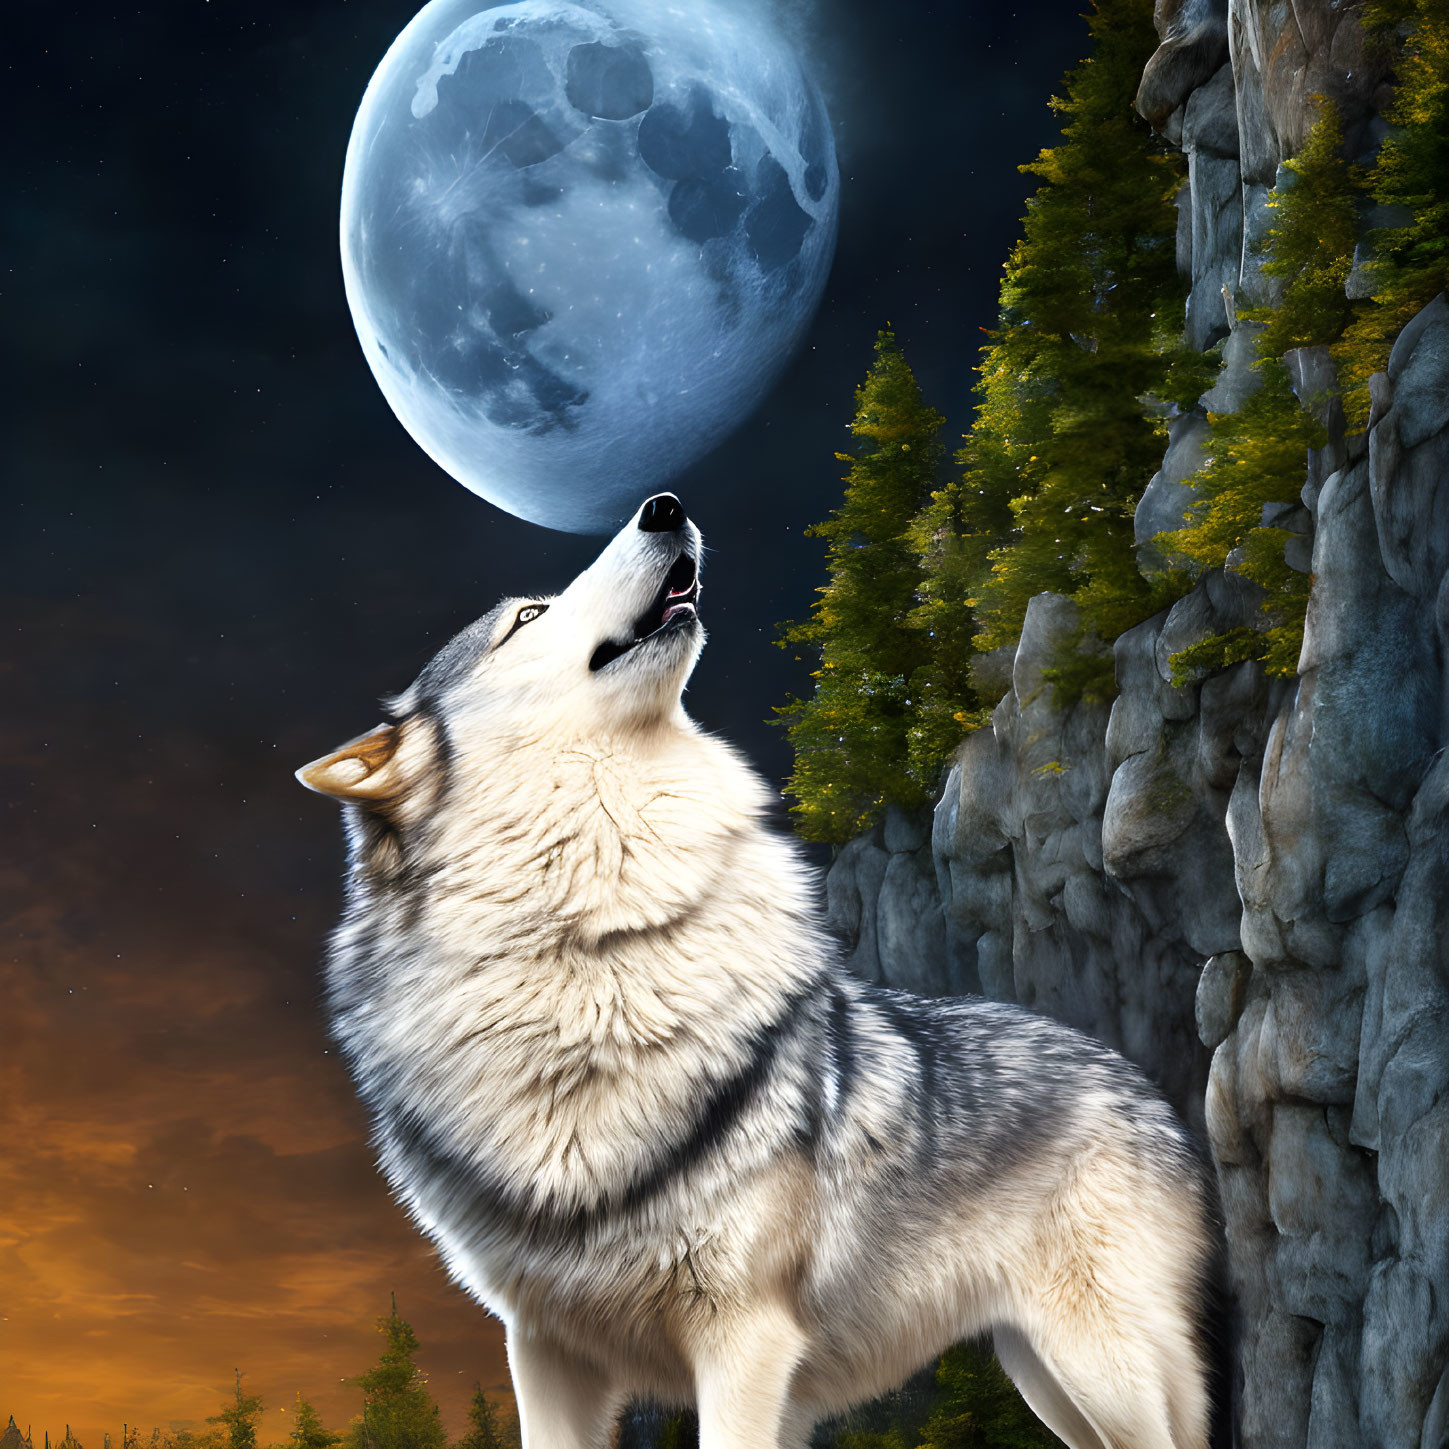 Wolf howling at full moon in twilight sky with pine trees and rocky cliff